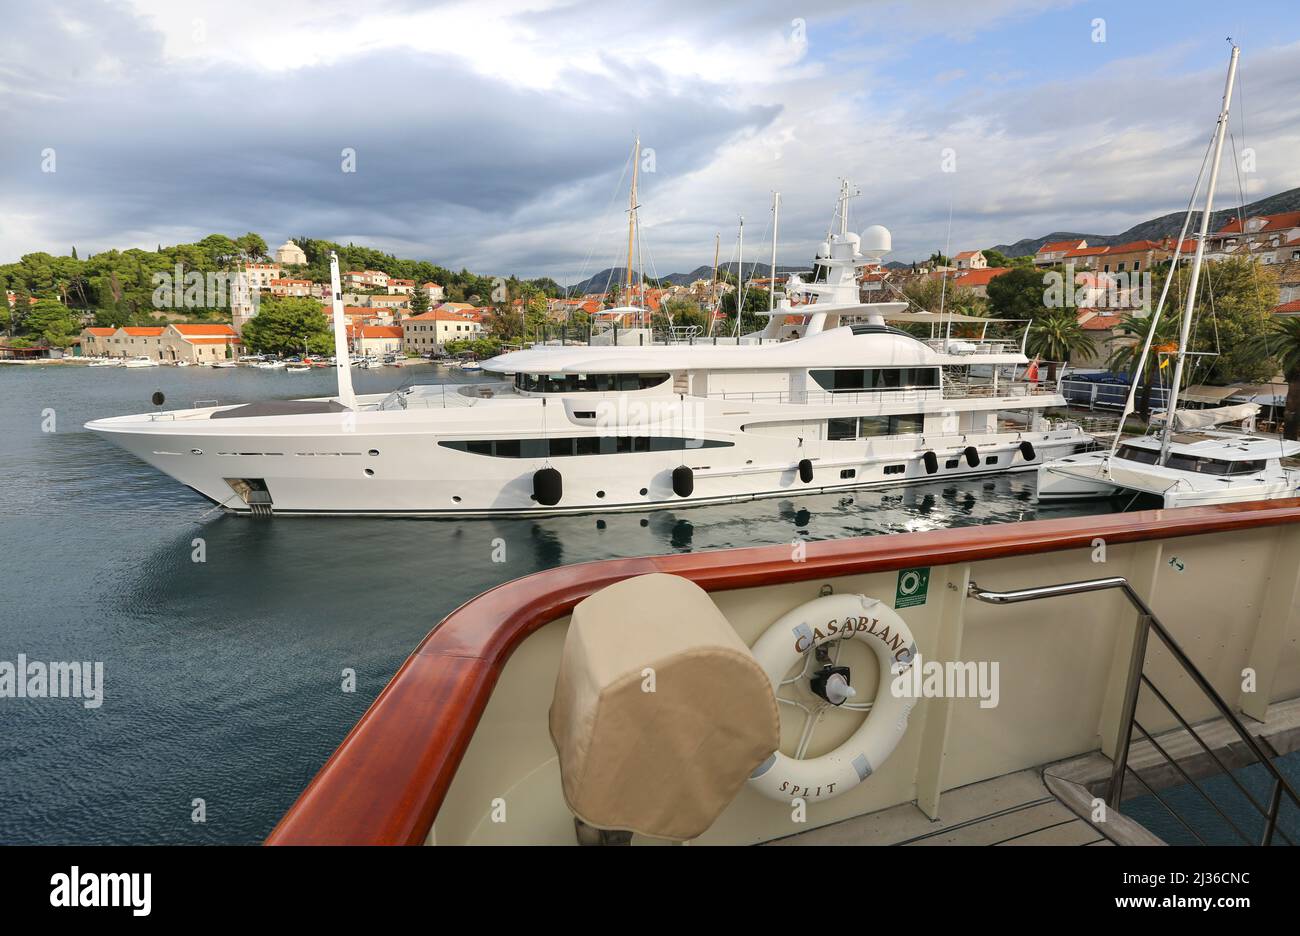 the-yacht-halo-owned-by-the-russian-billionaire-and-oligarch-roman